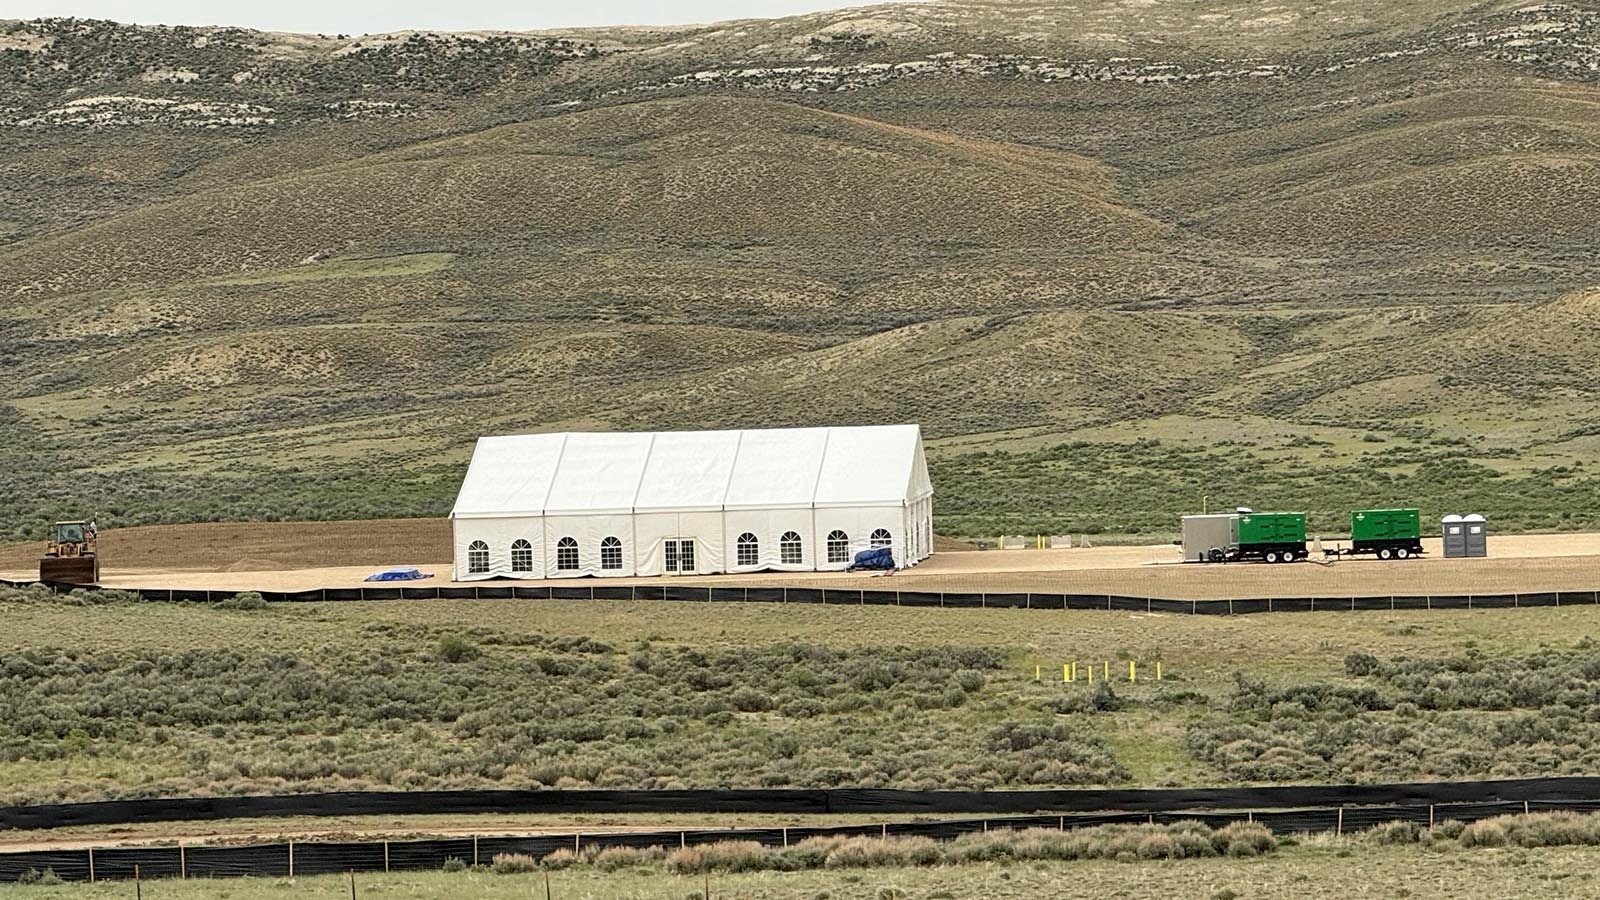 TerraPower held a groundbreaking ceremony for its novel nuclear reactor in the marquee tent off Highway 189, just south of Kemmerer, Wyoming.